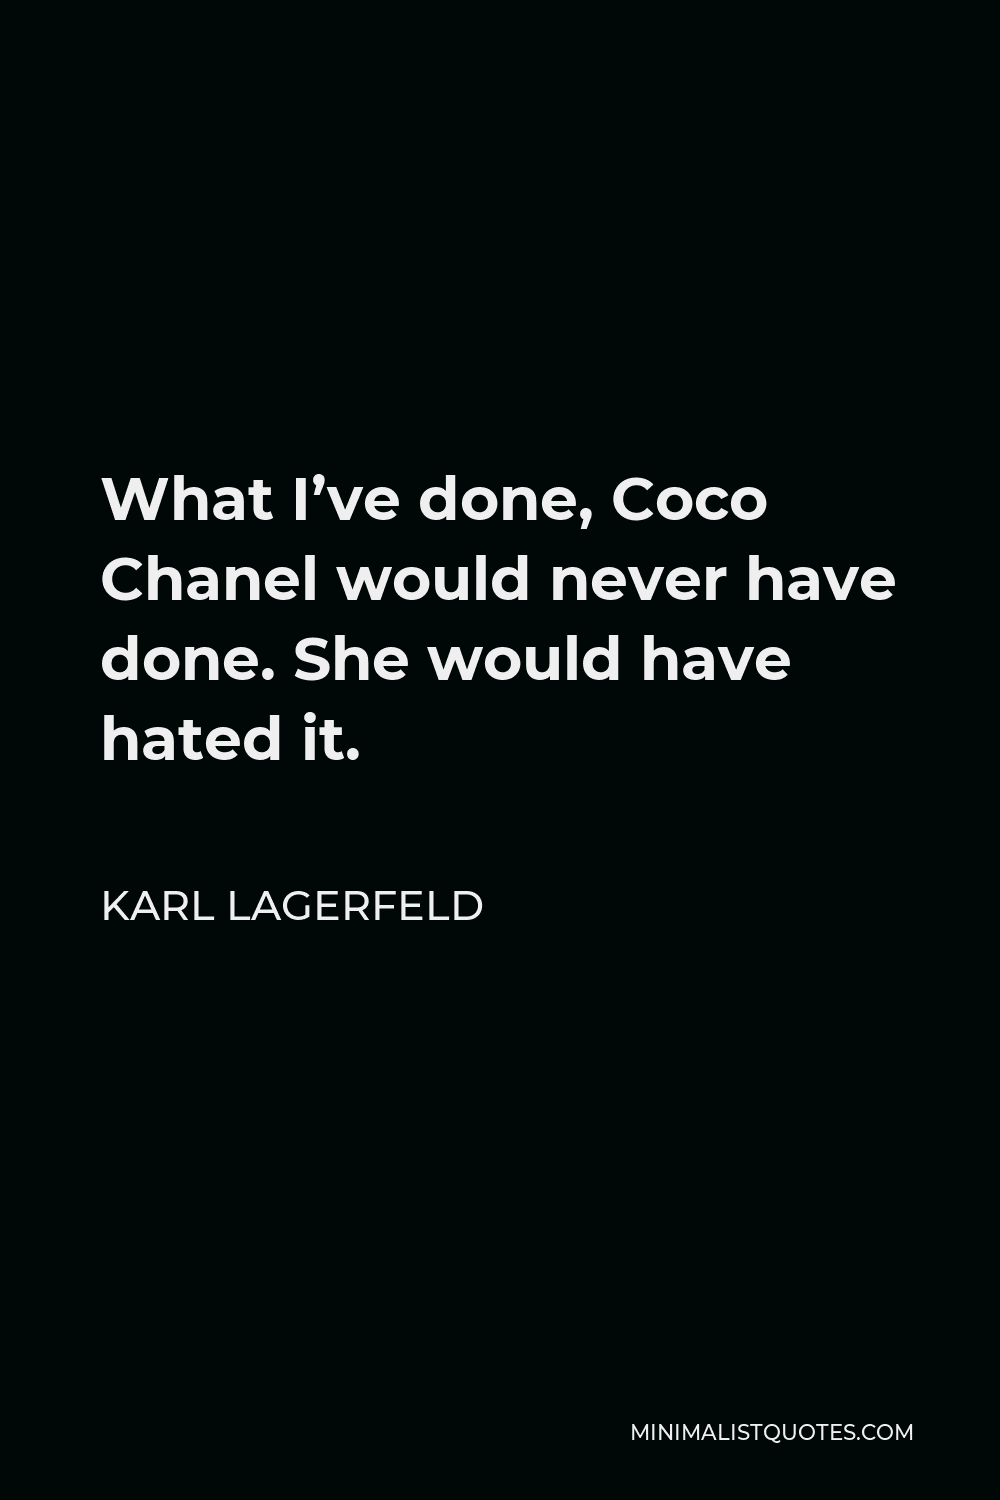 Karl Lagerfeld Quote - What I’ve done, Coco Chanel would never have done. She would have hated it.